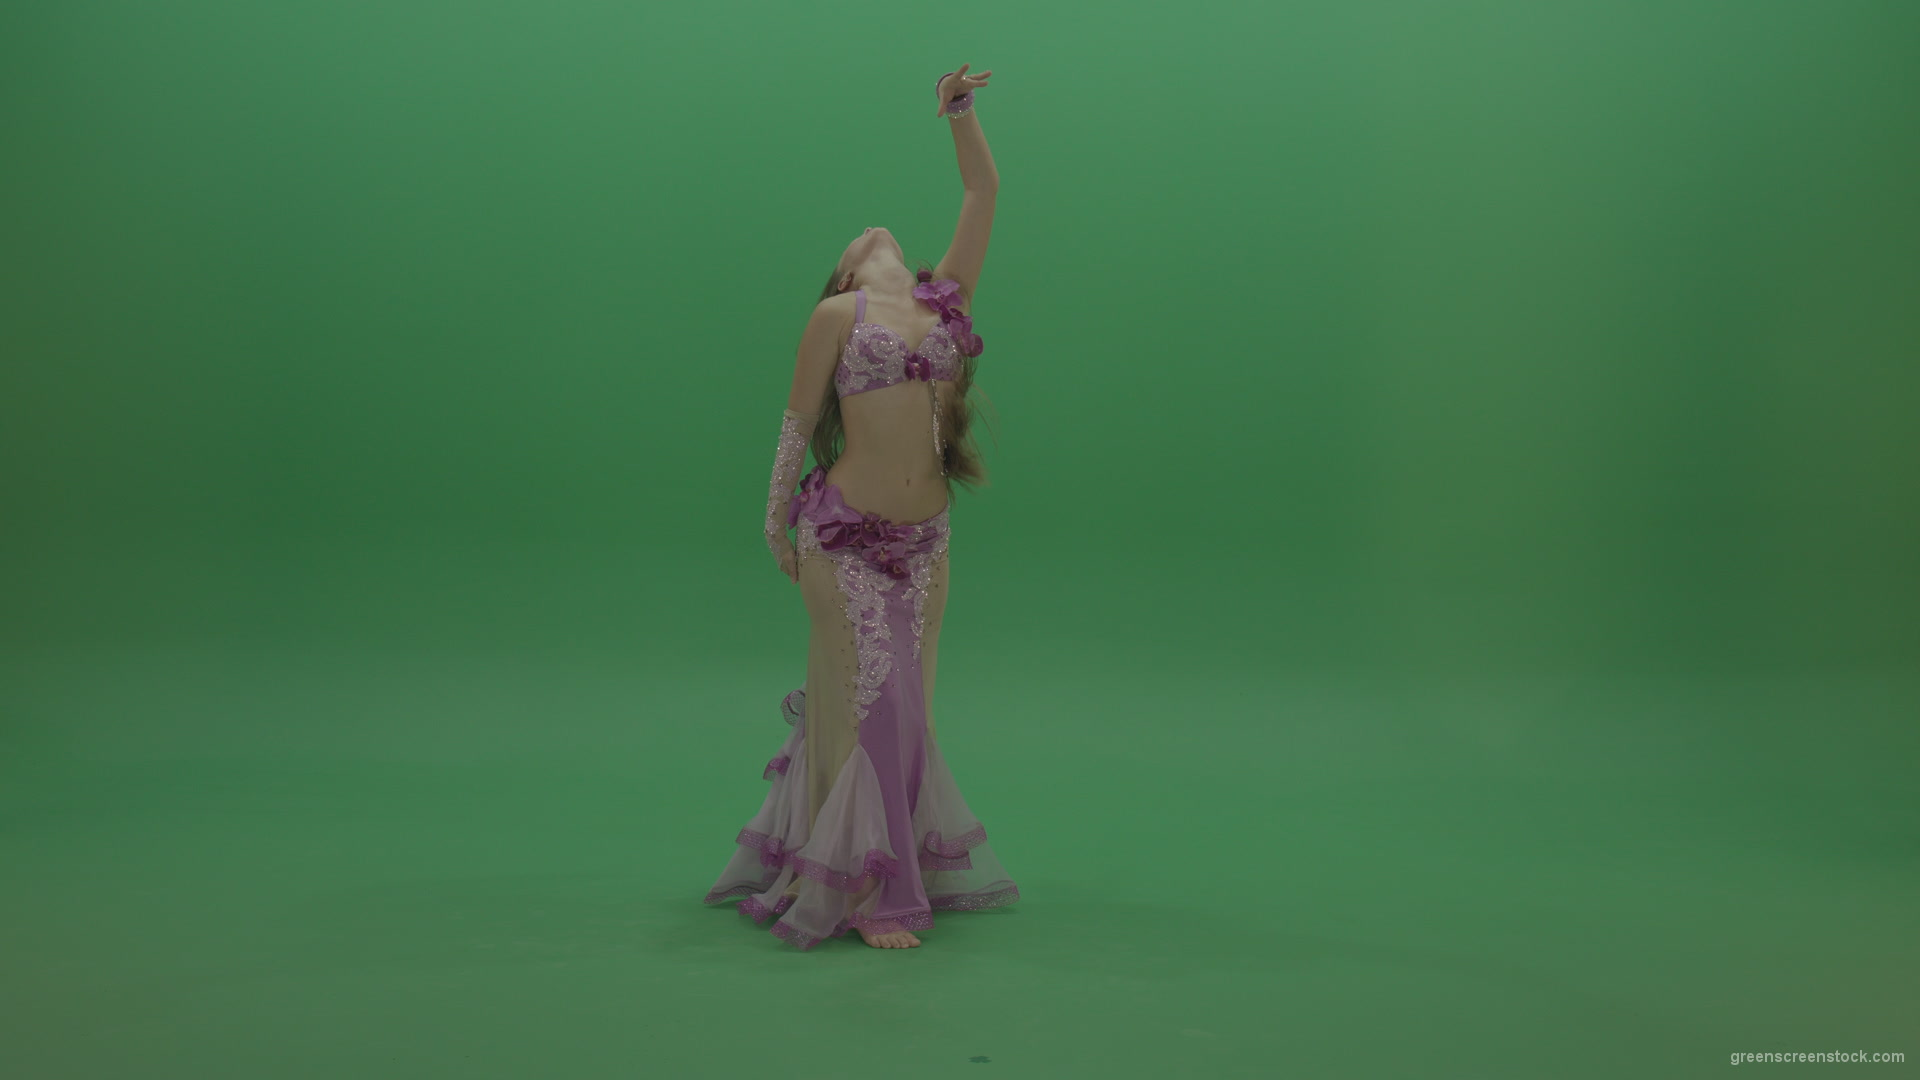 Sightly-belly-dancer-in-pink-wear-display-amazing-dance-moves-over-chromakey-background_009 Green Screen Stock